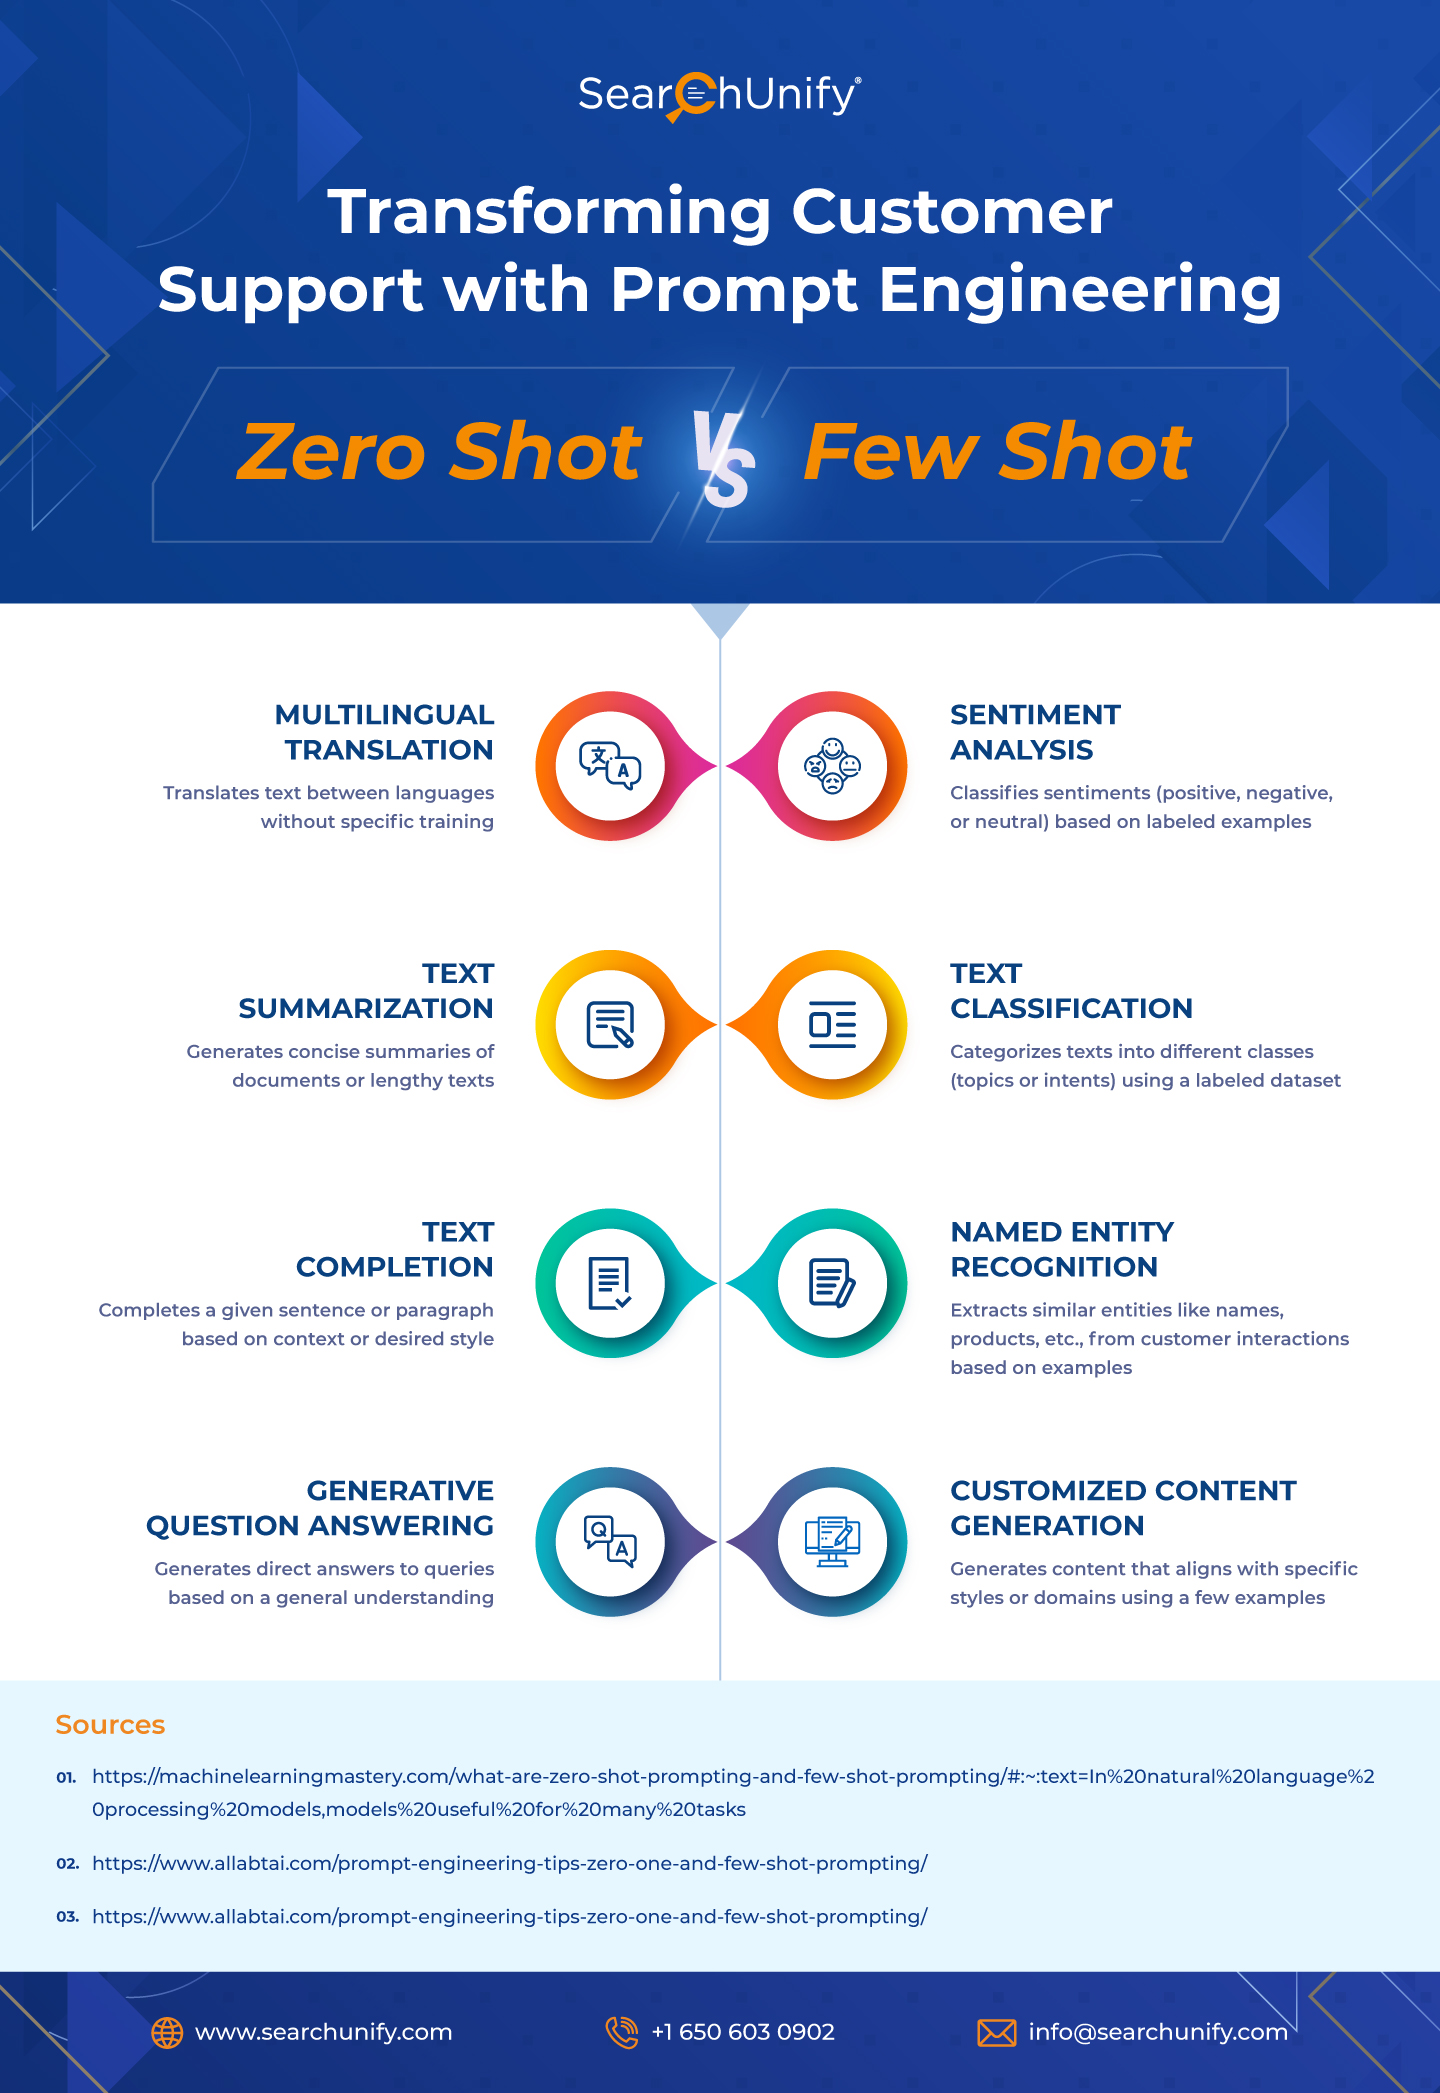 Exploring Zero-Shot and Few-Shot Prompting for Customer Support